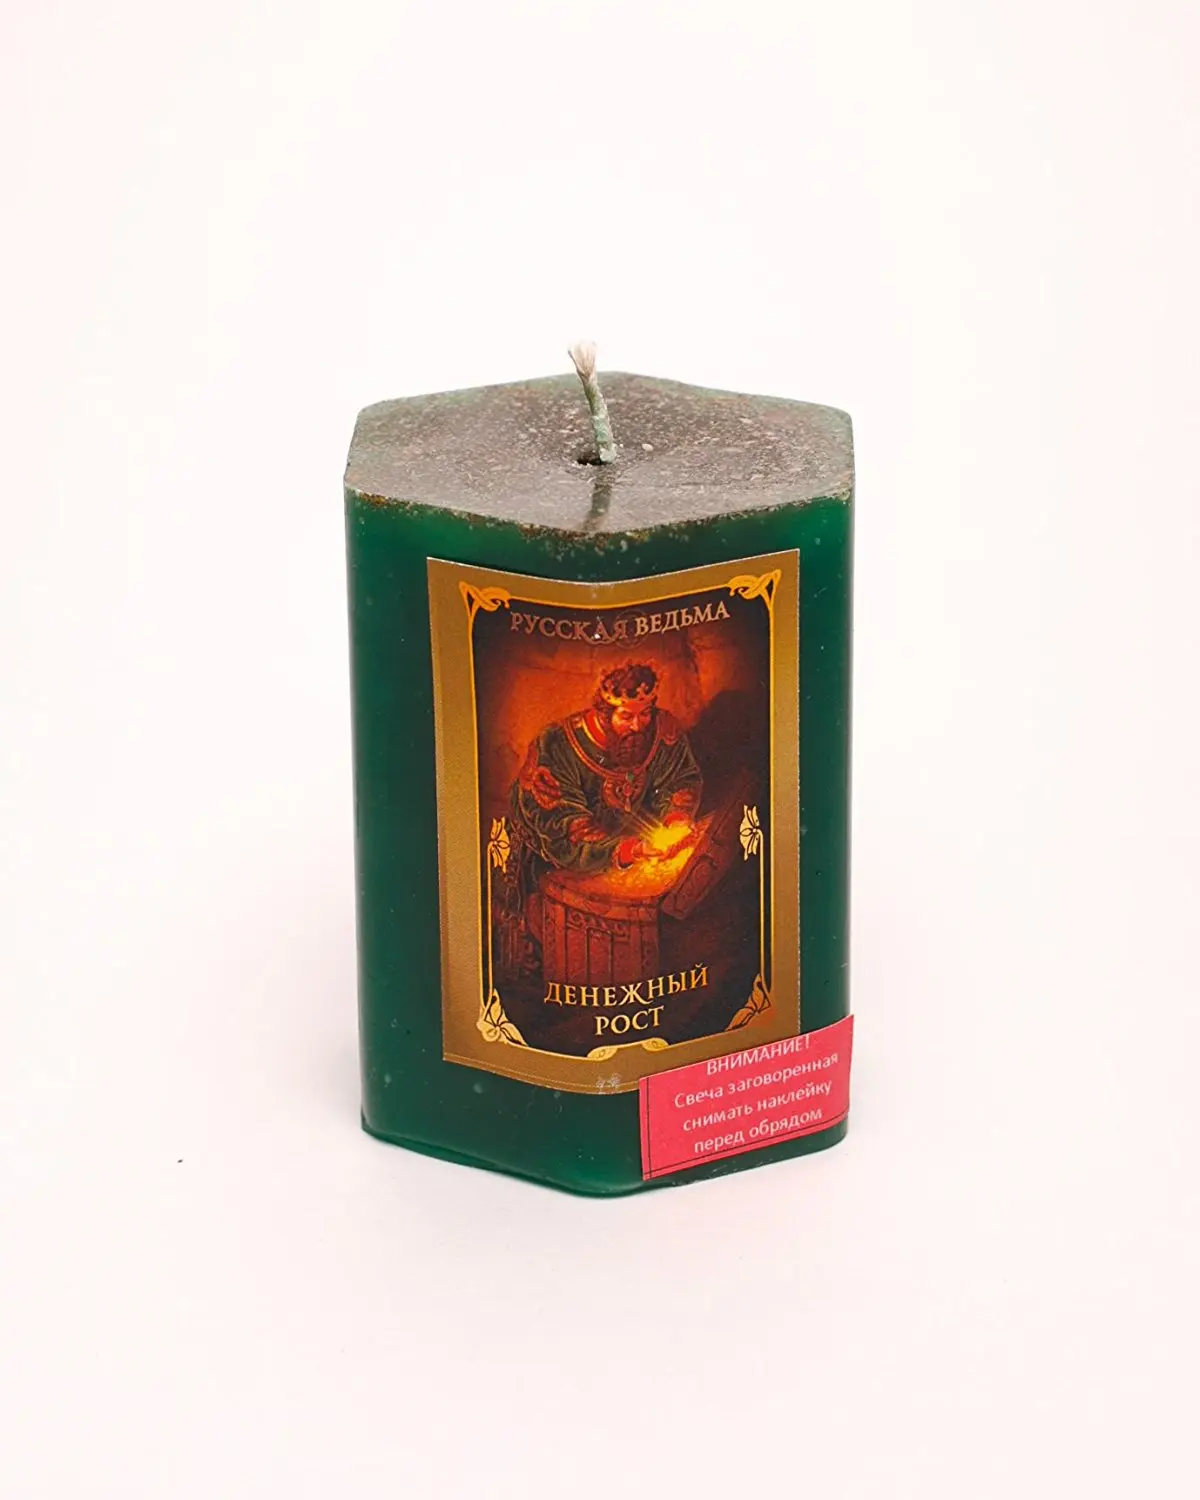 Buy Anxiety and sadness herbal candle Wicca Pagan in Cheap P